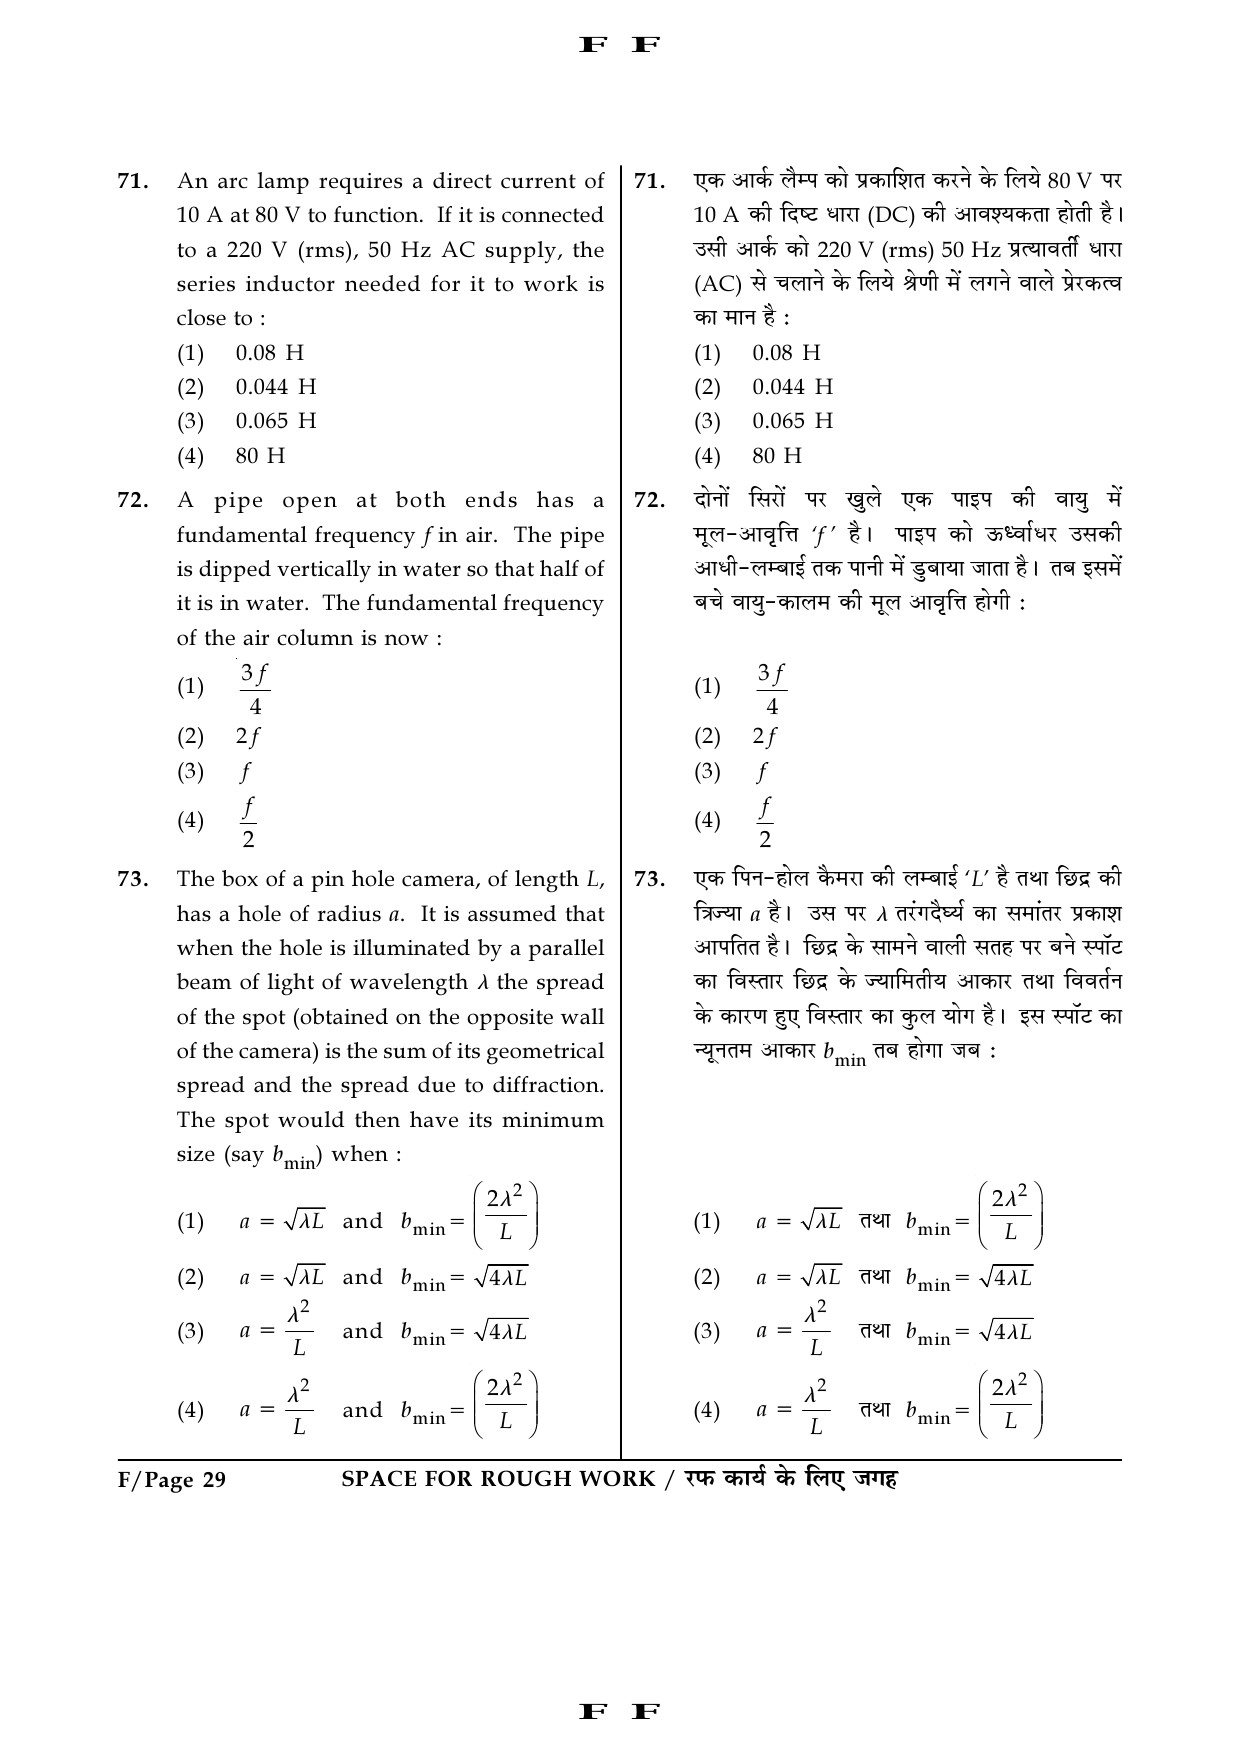 JEE Main Exam Question Paper 2016 Booklet F 29